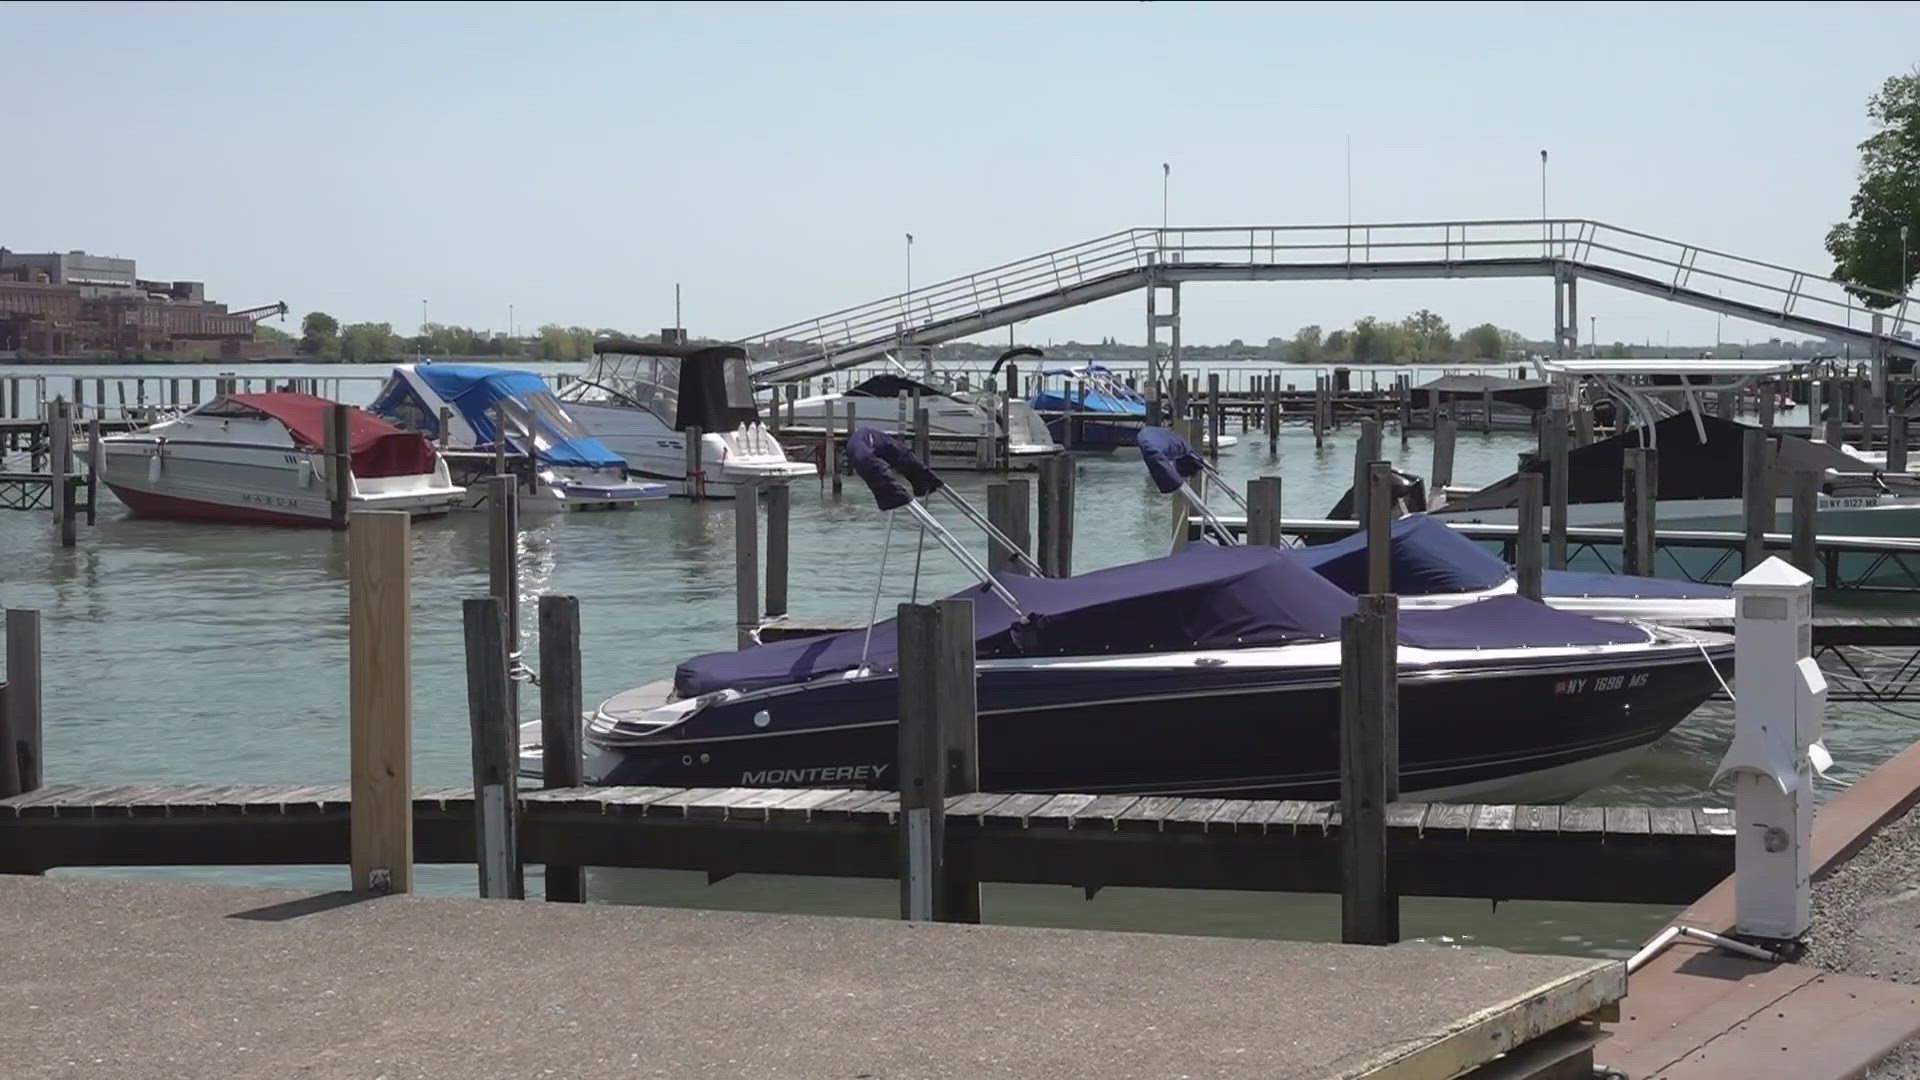 Crews are working to get boats out of storage and out onto the water ahead of Memorial Day.